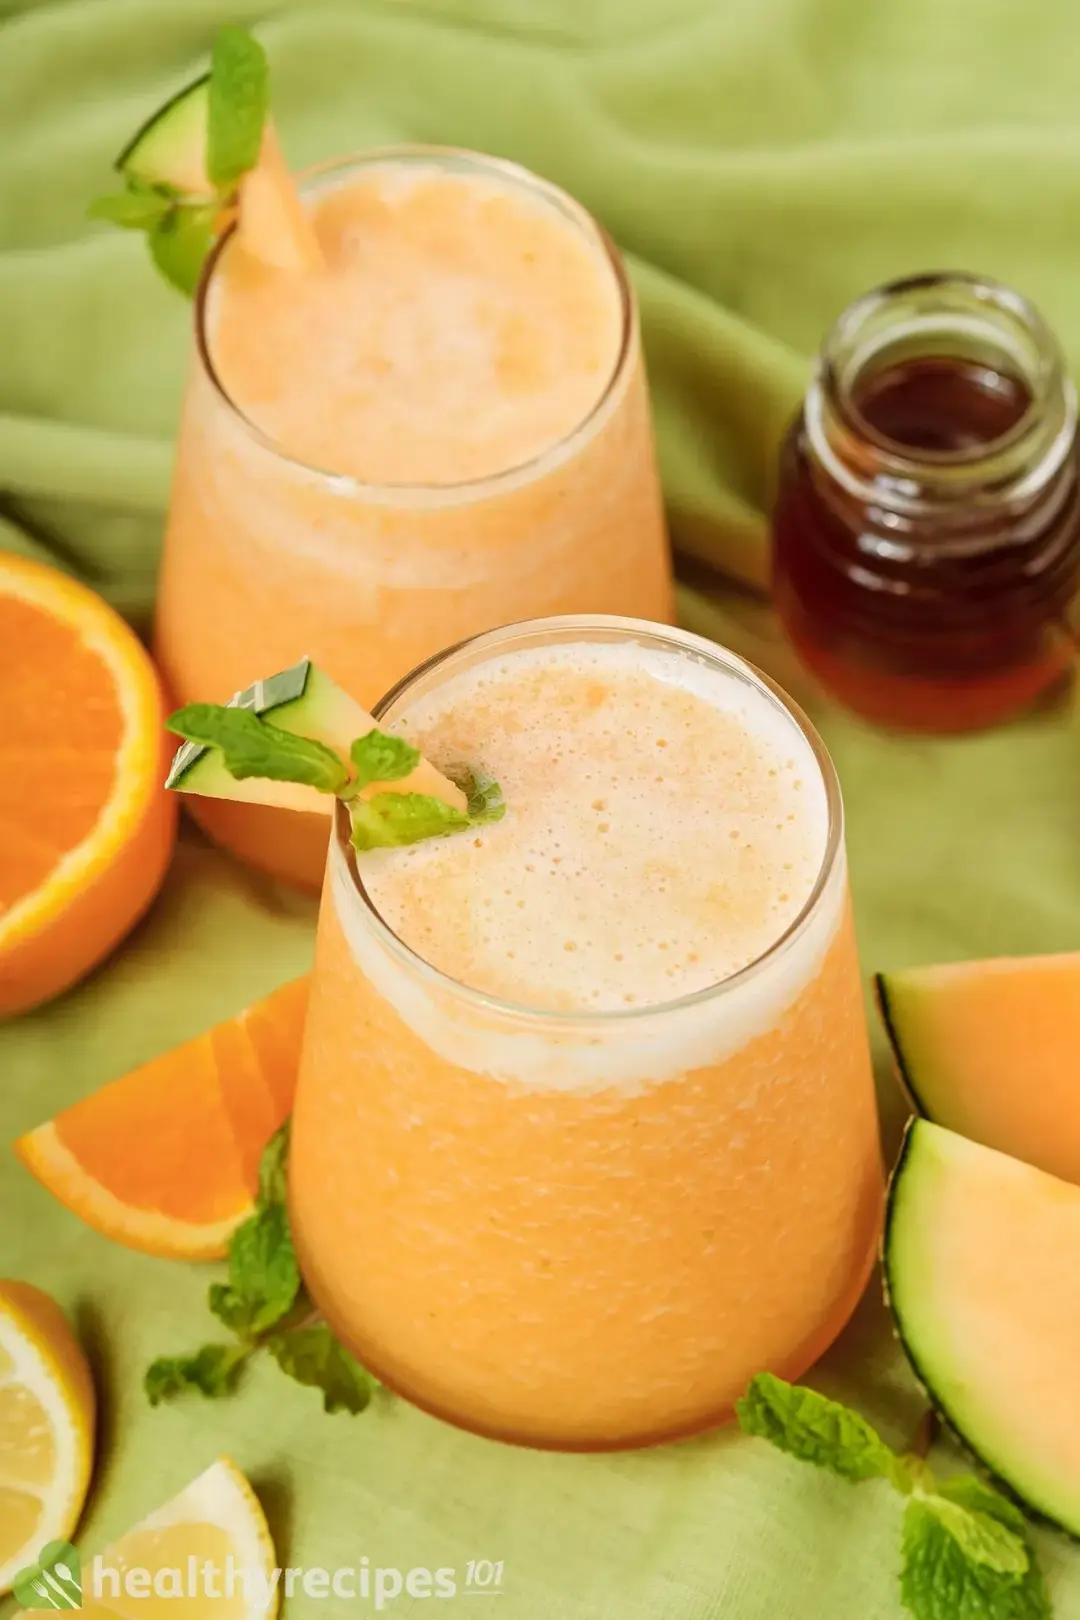 How to Prepare a Cantaloupe for Smoothies